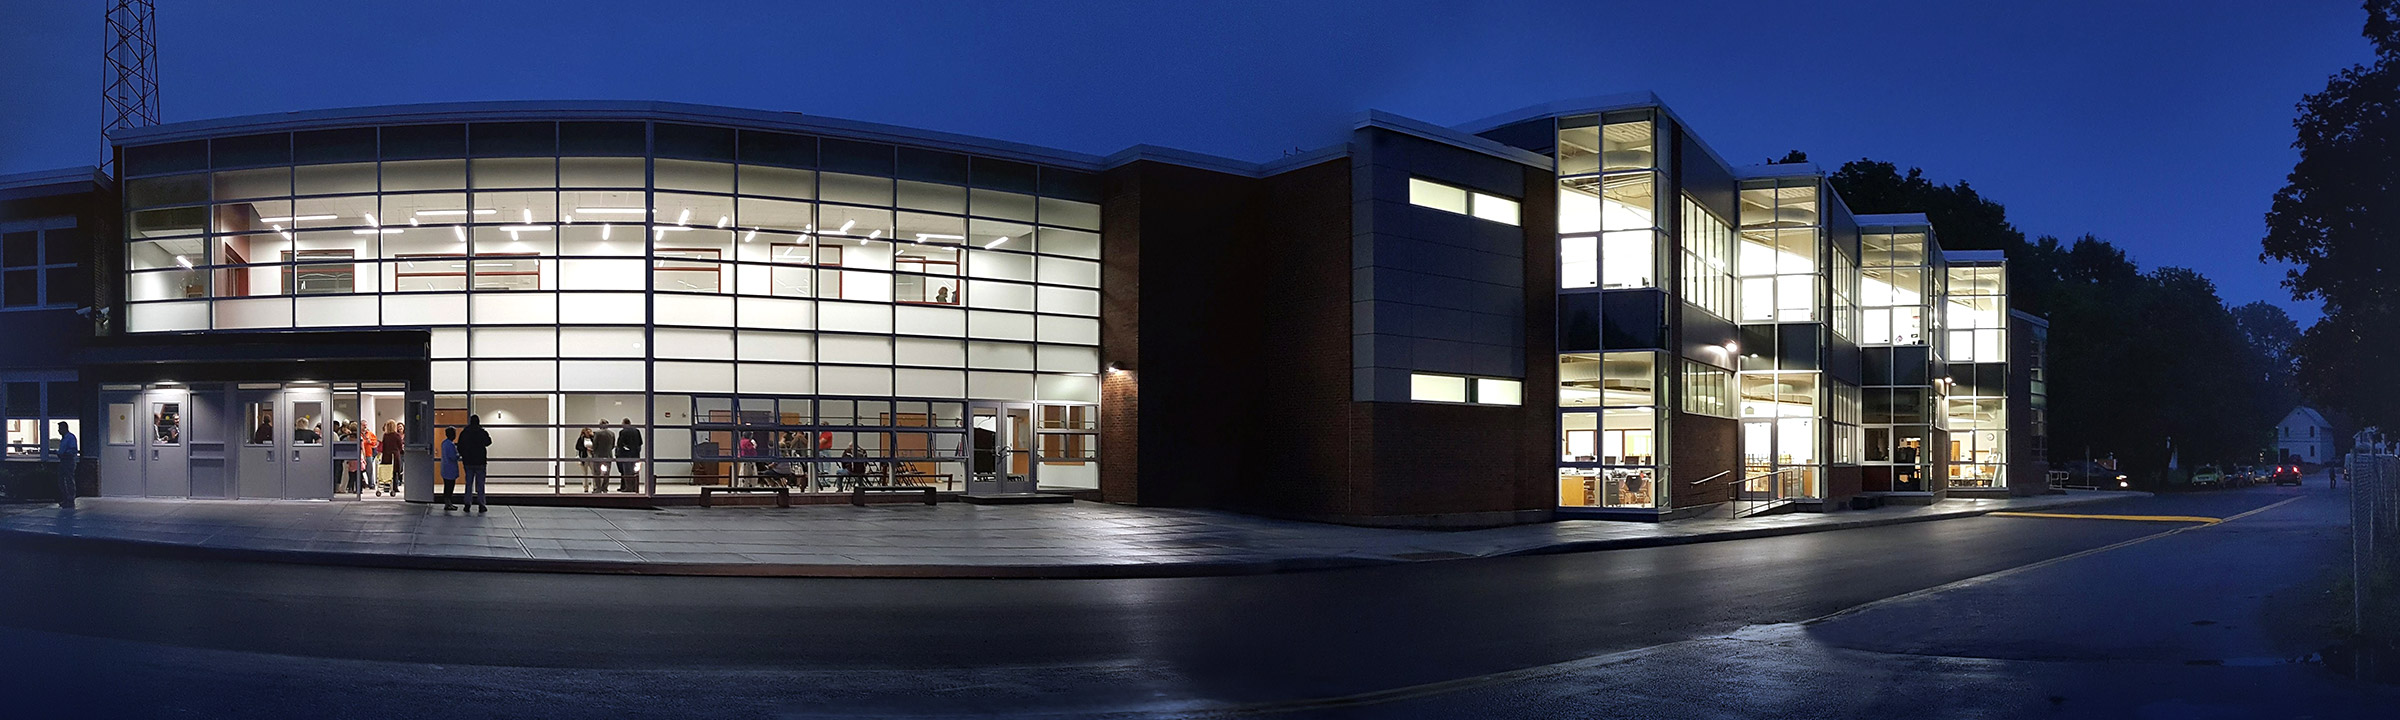 Panoramic photo of Burnt Hills-Ballston Lake High School building in the evening with brightly-lit windows and people